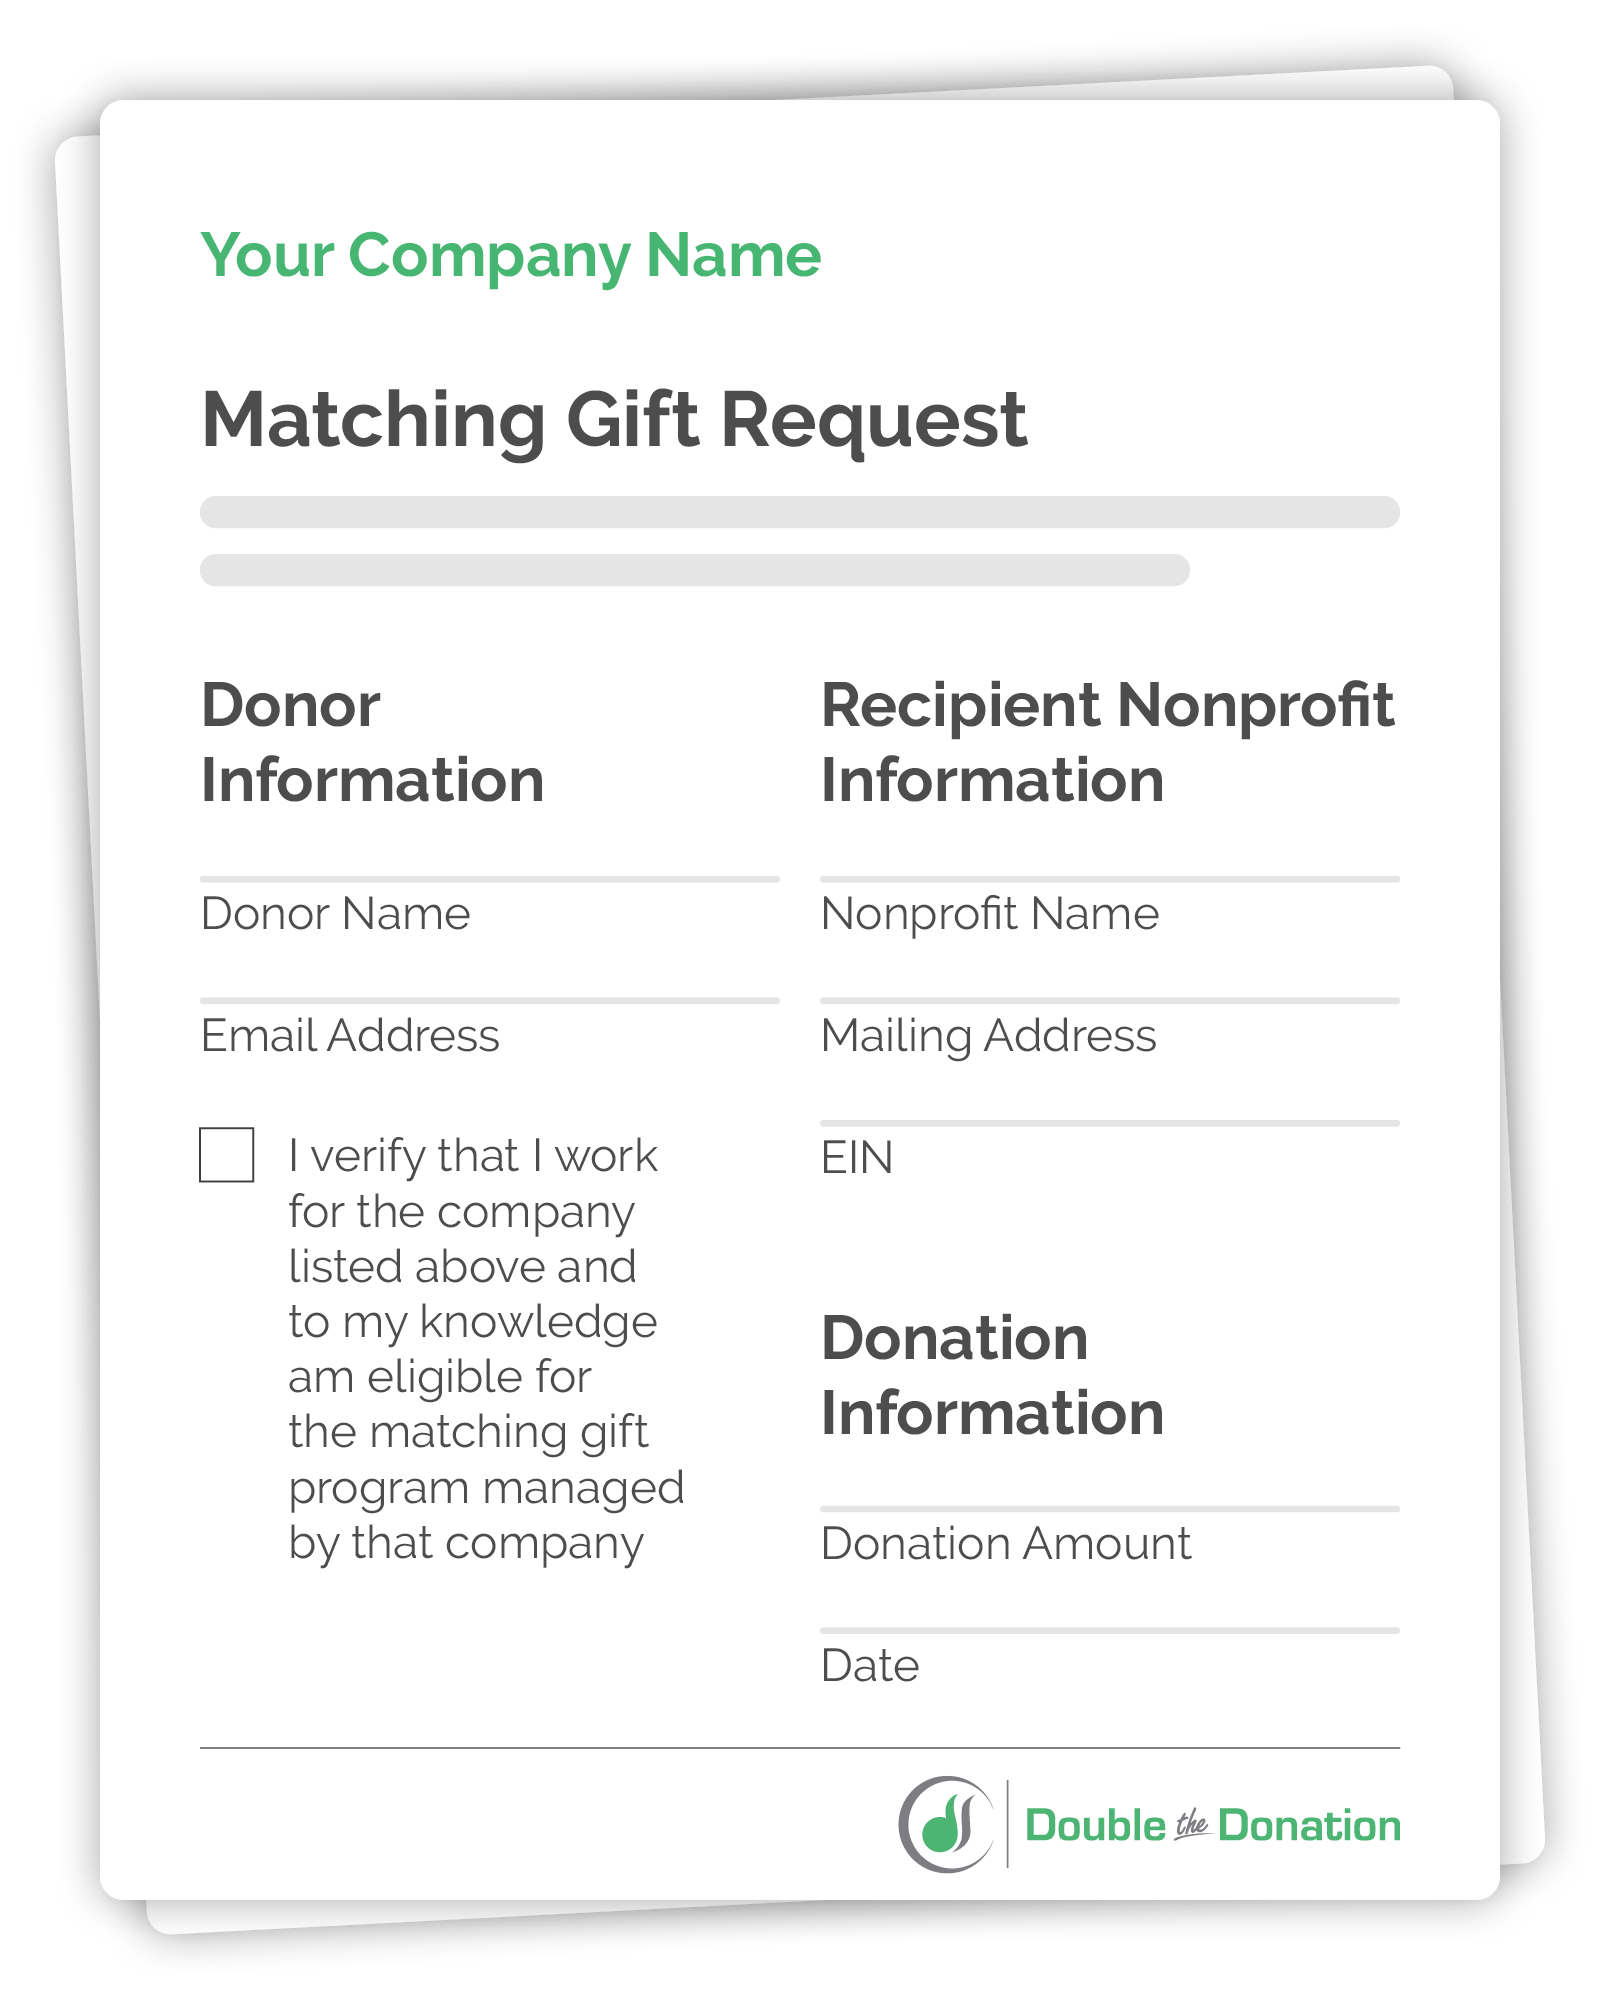 Here's an example of Double the Donation's standard matching gift request form